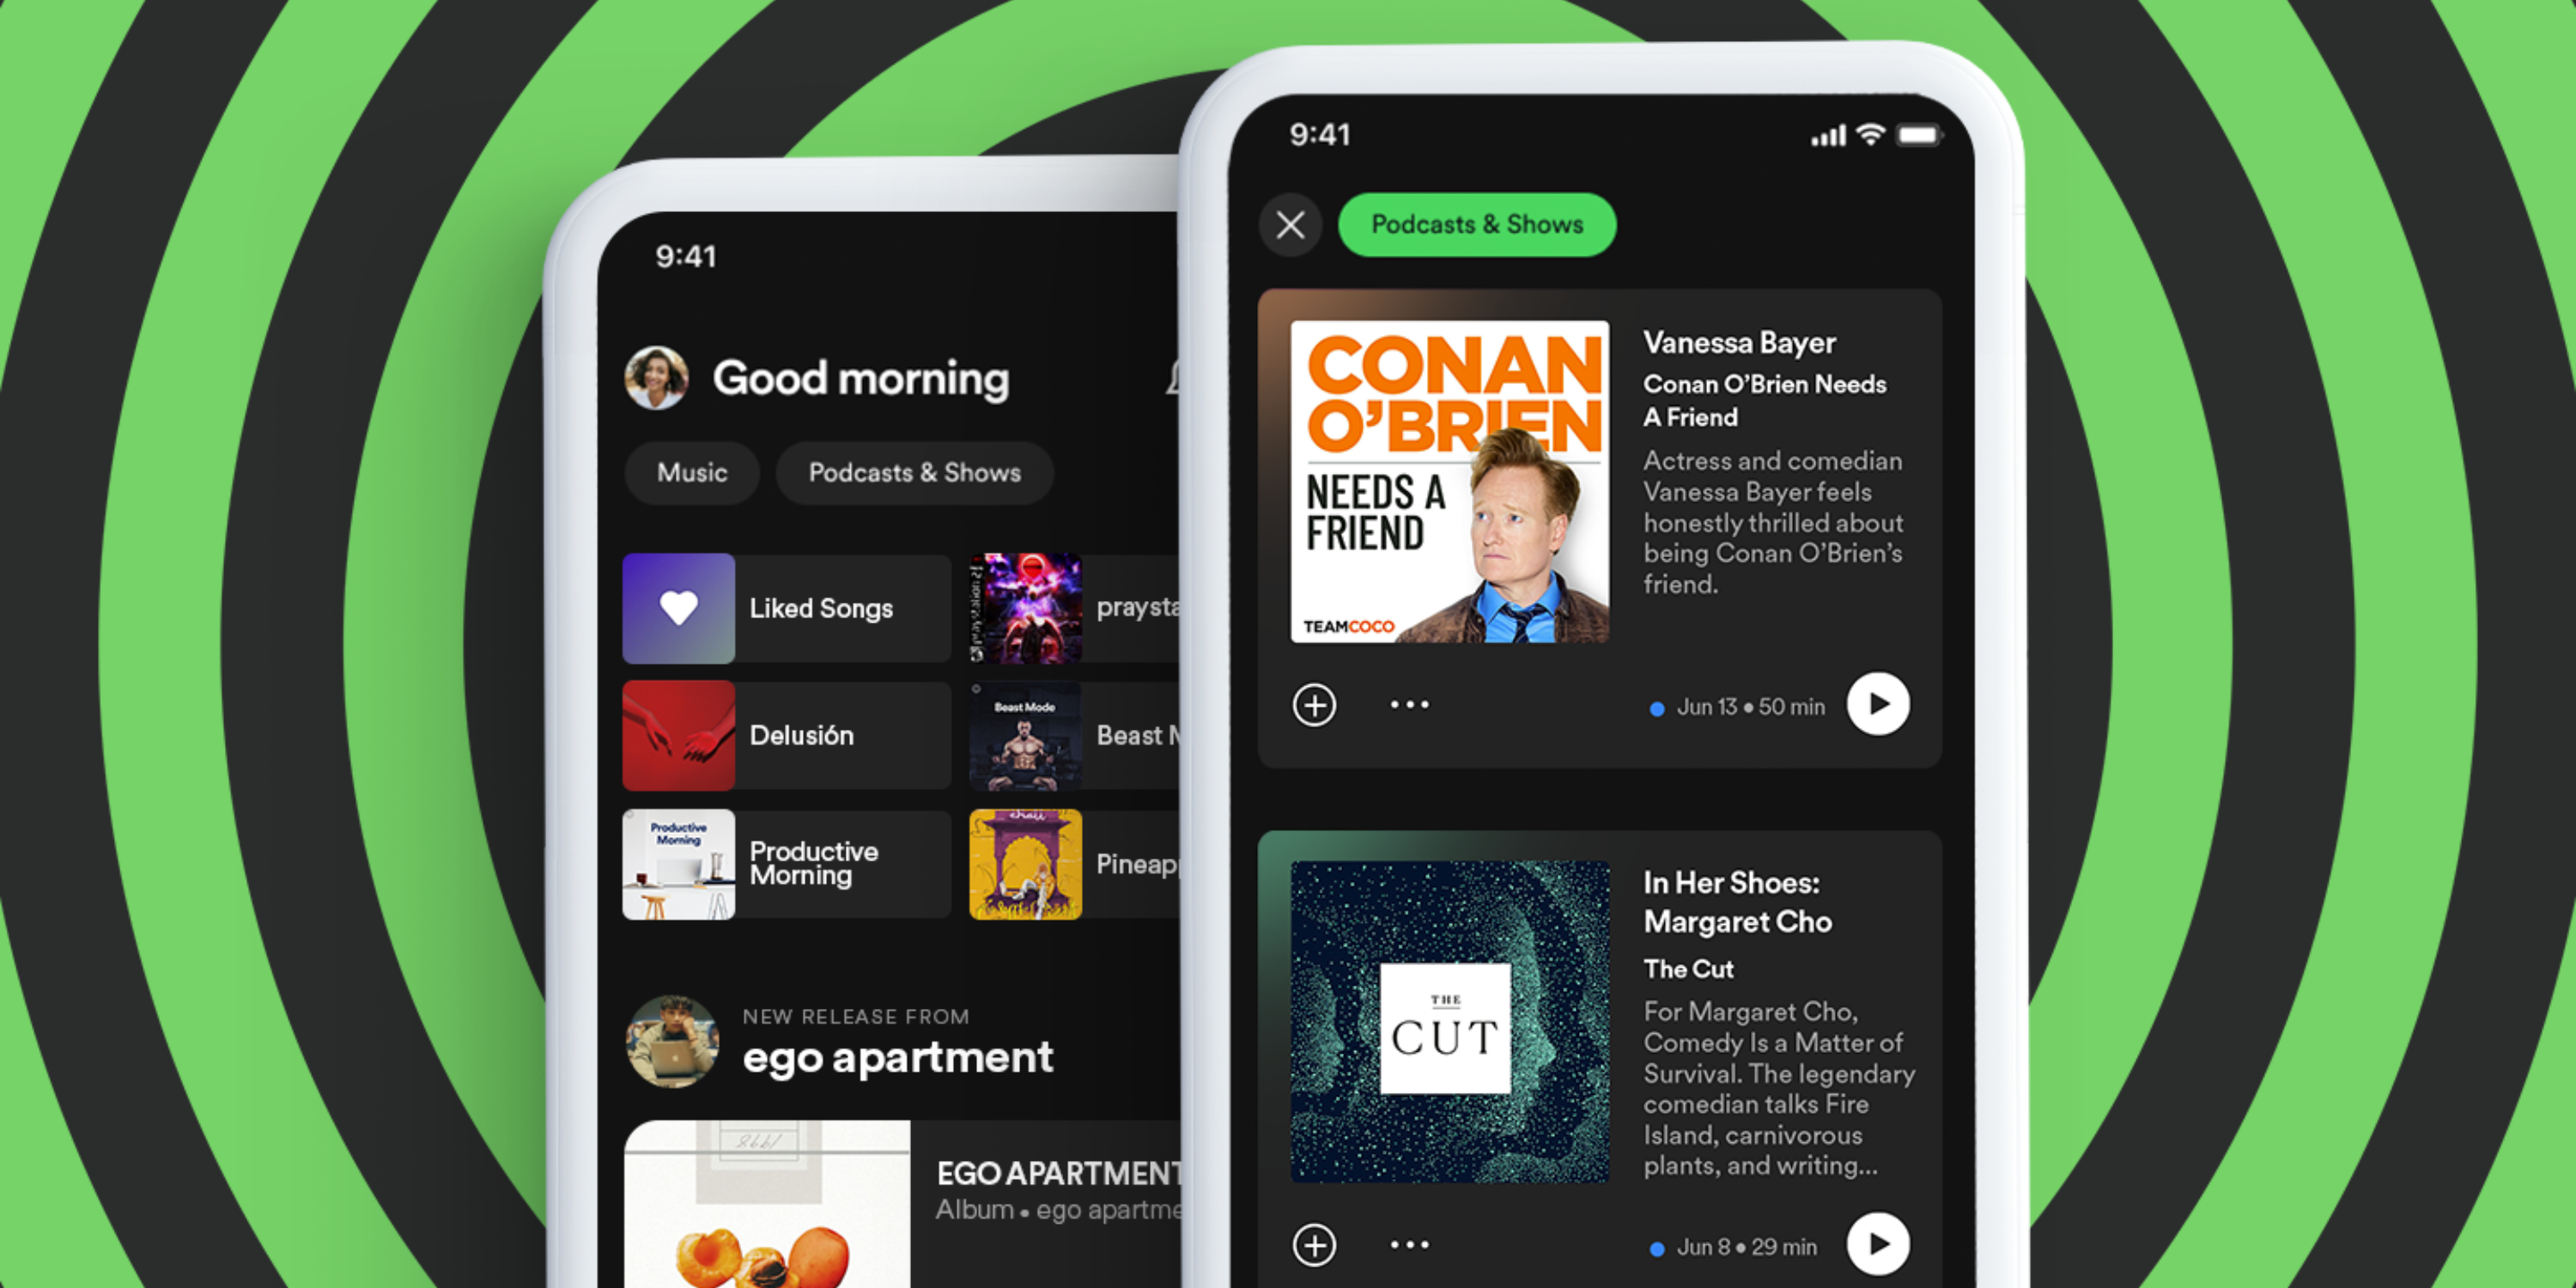 Spotify: A new home screen that separates podcasts and music